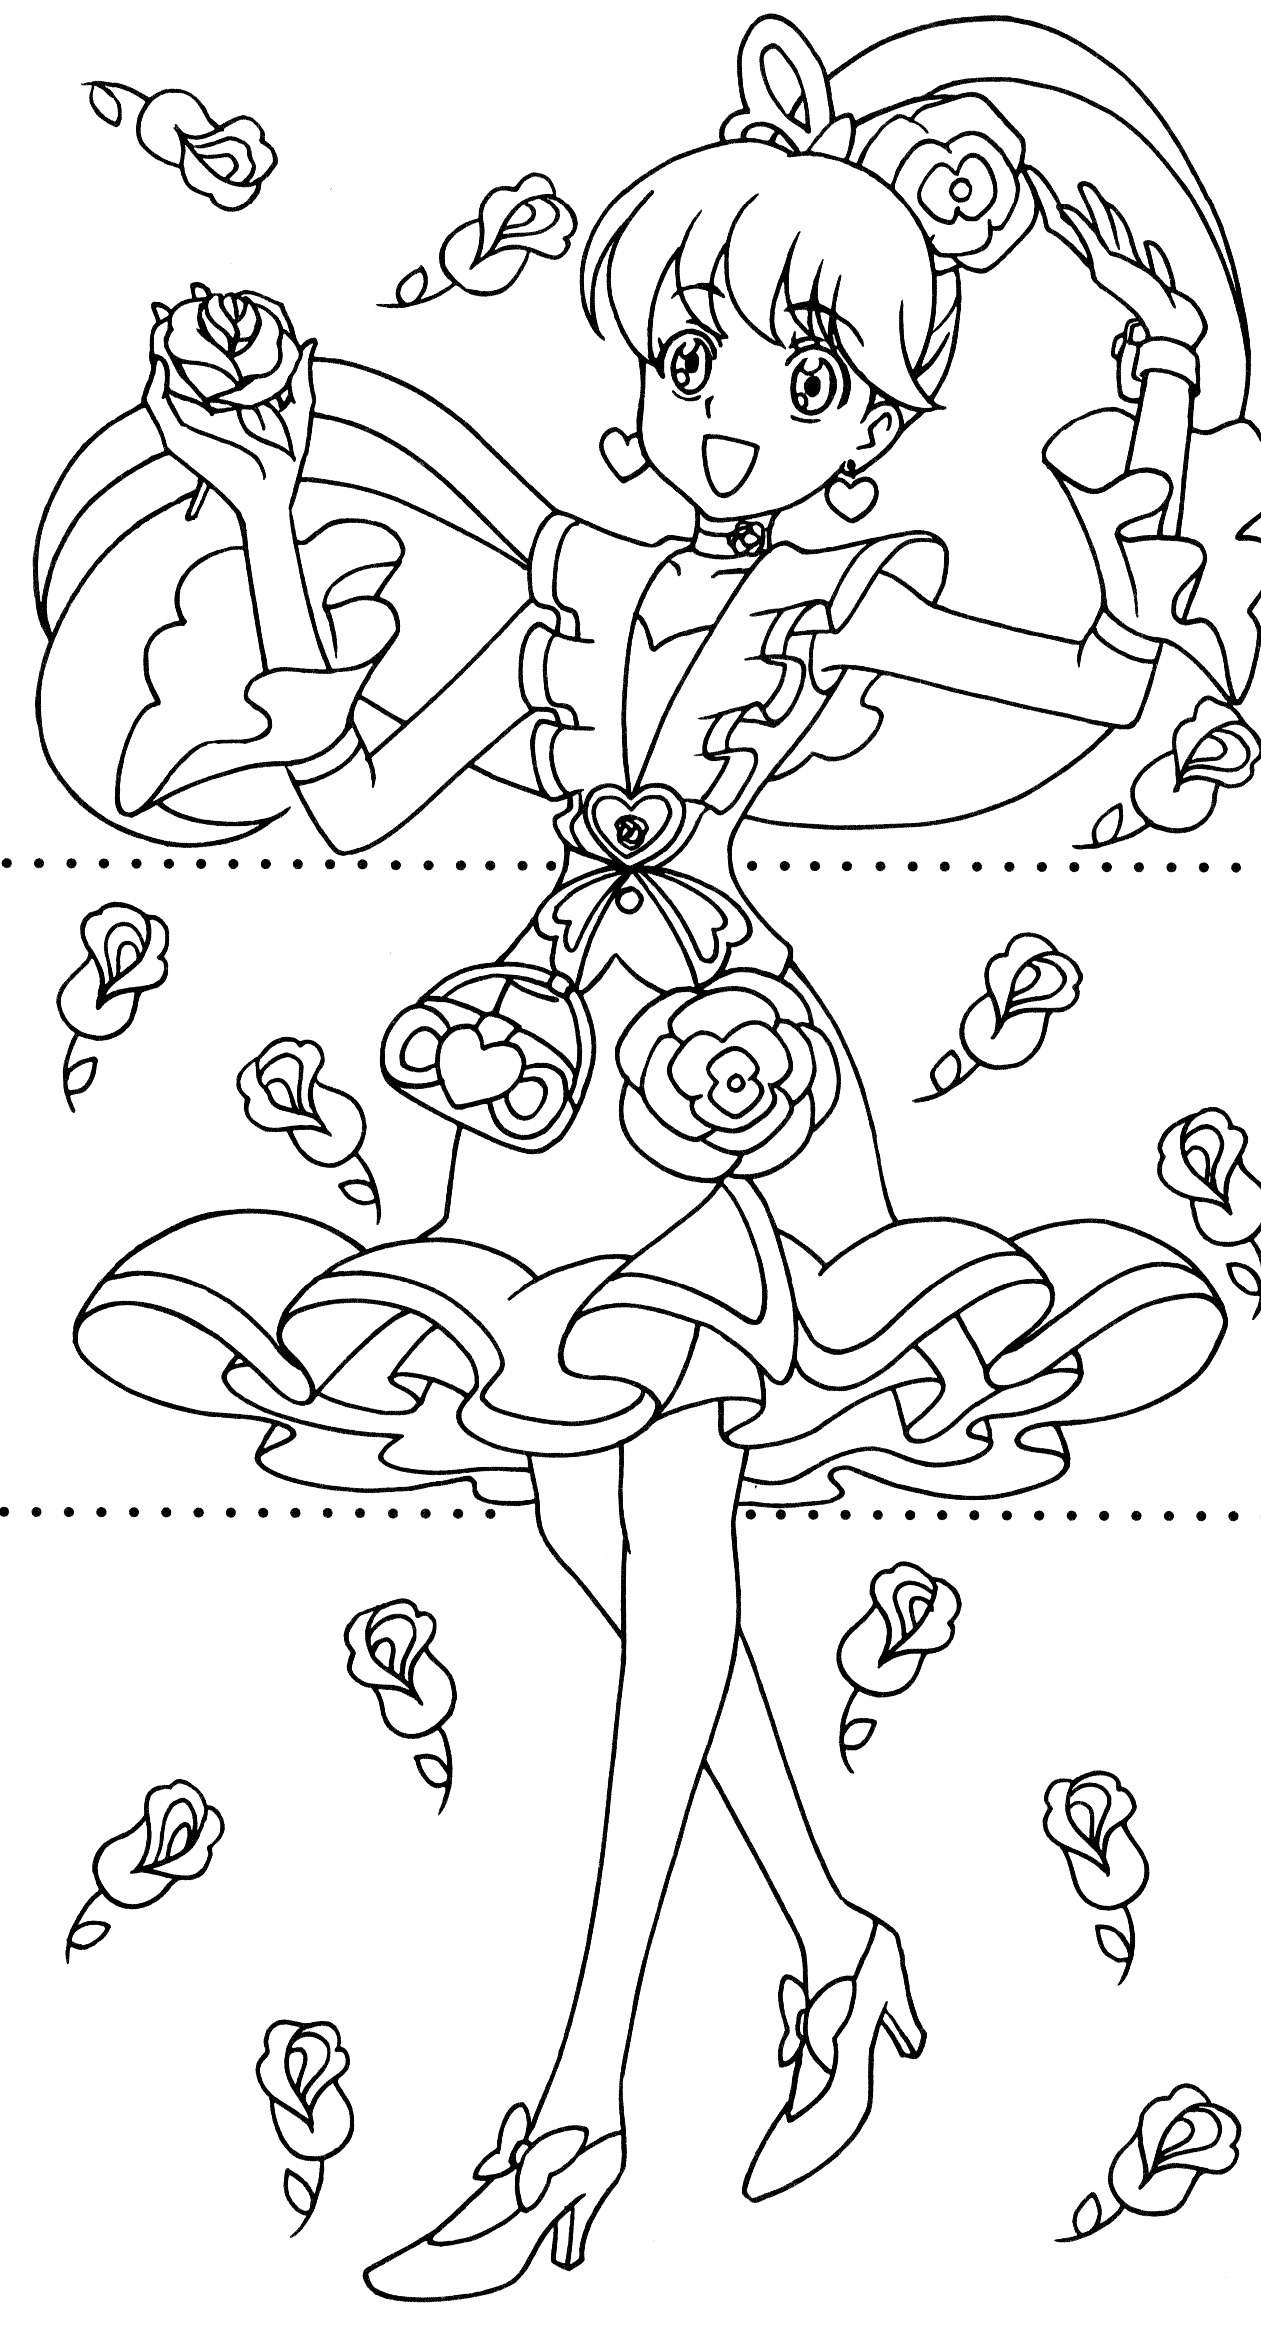 Happiness Charge Precure Dressup Coloring Book 27